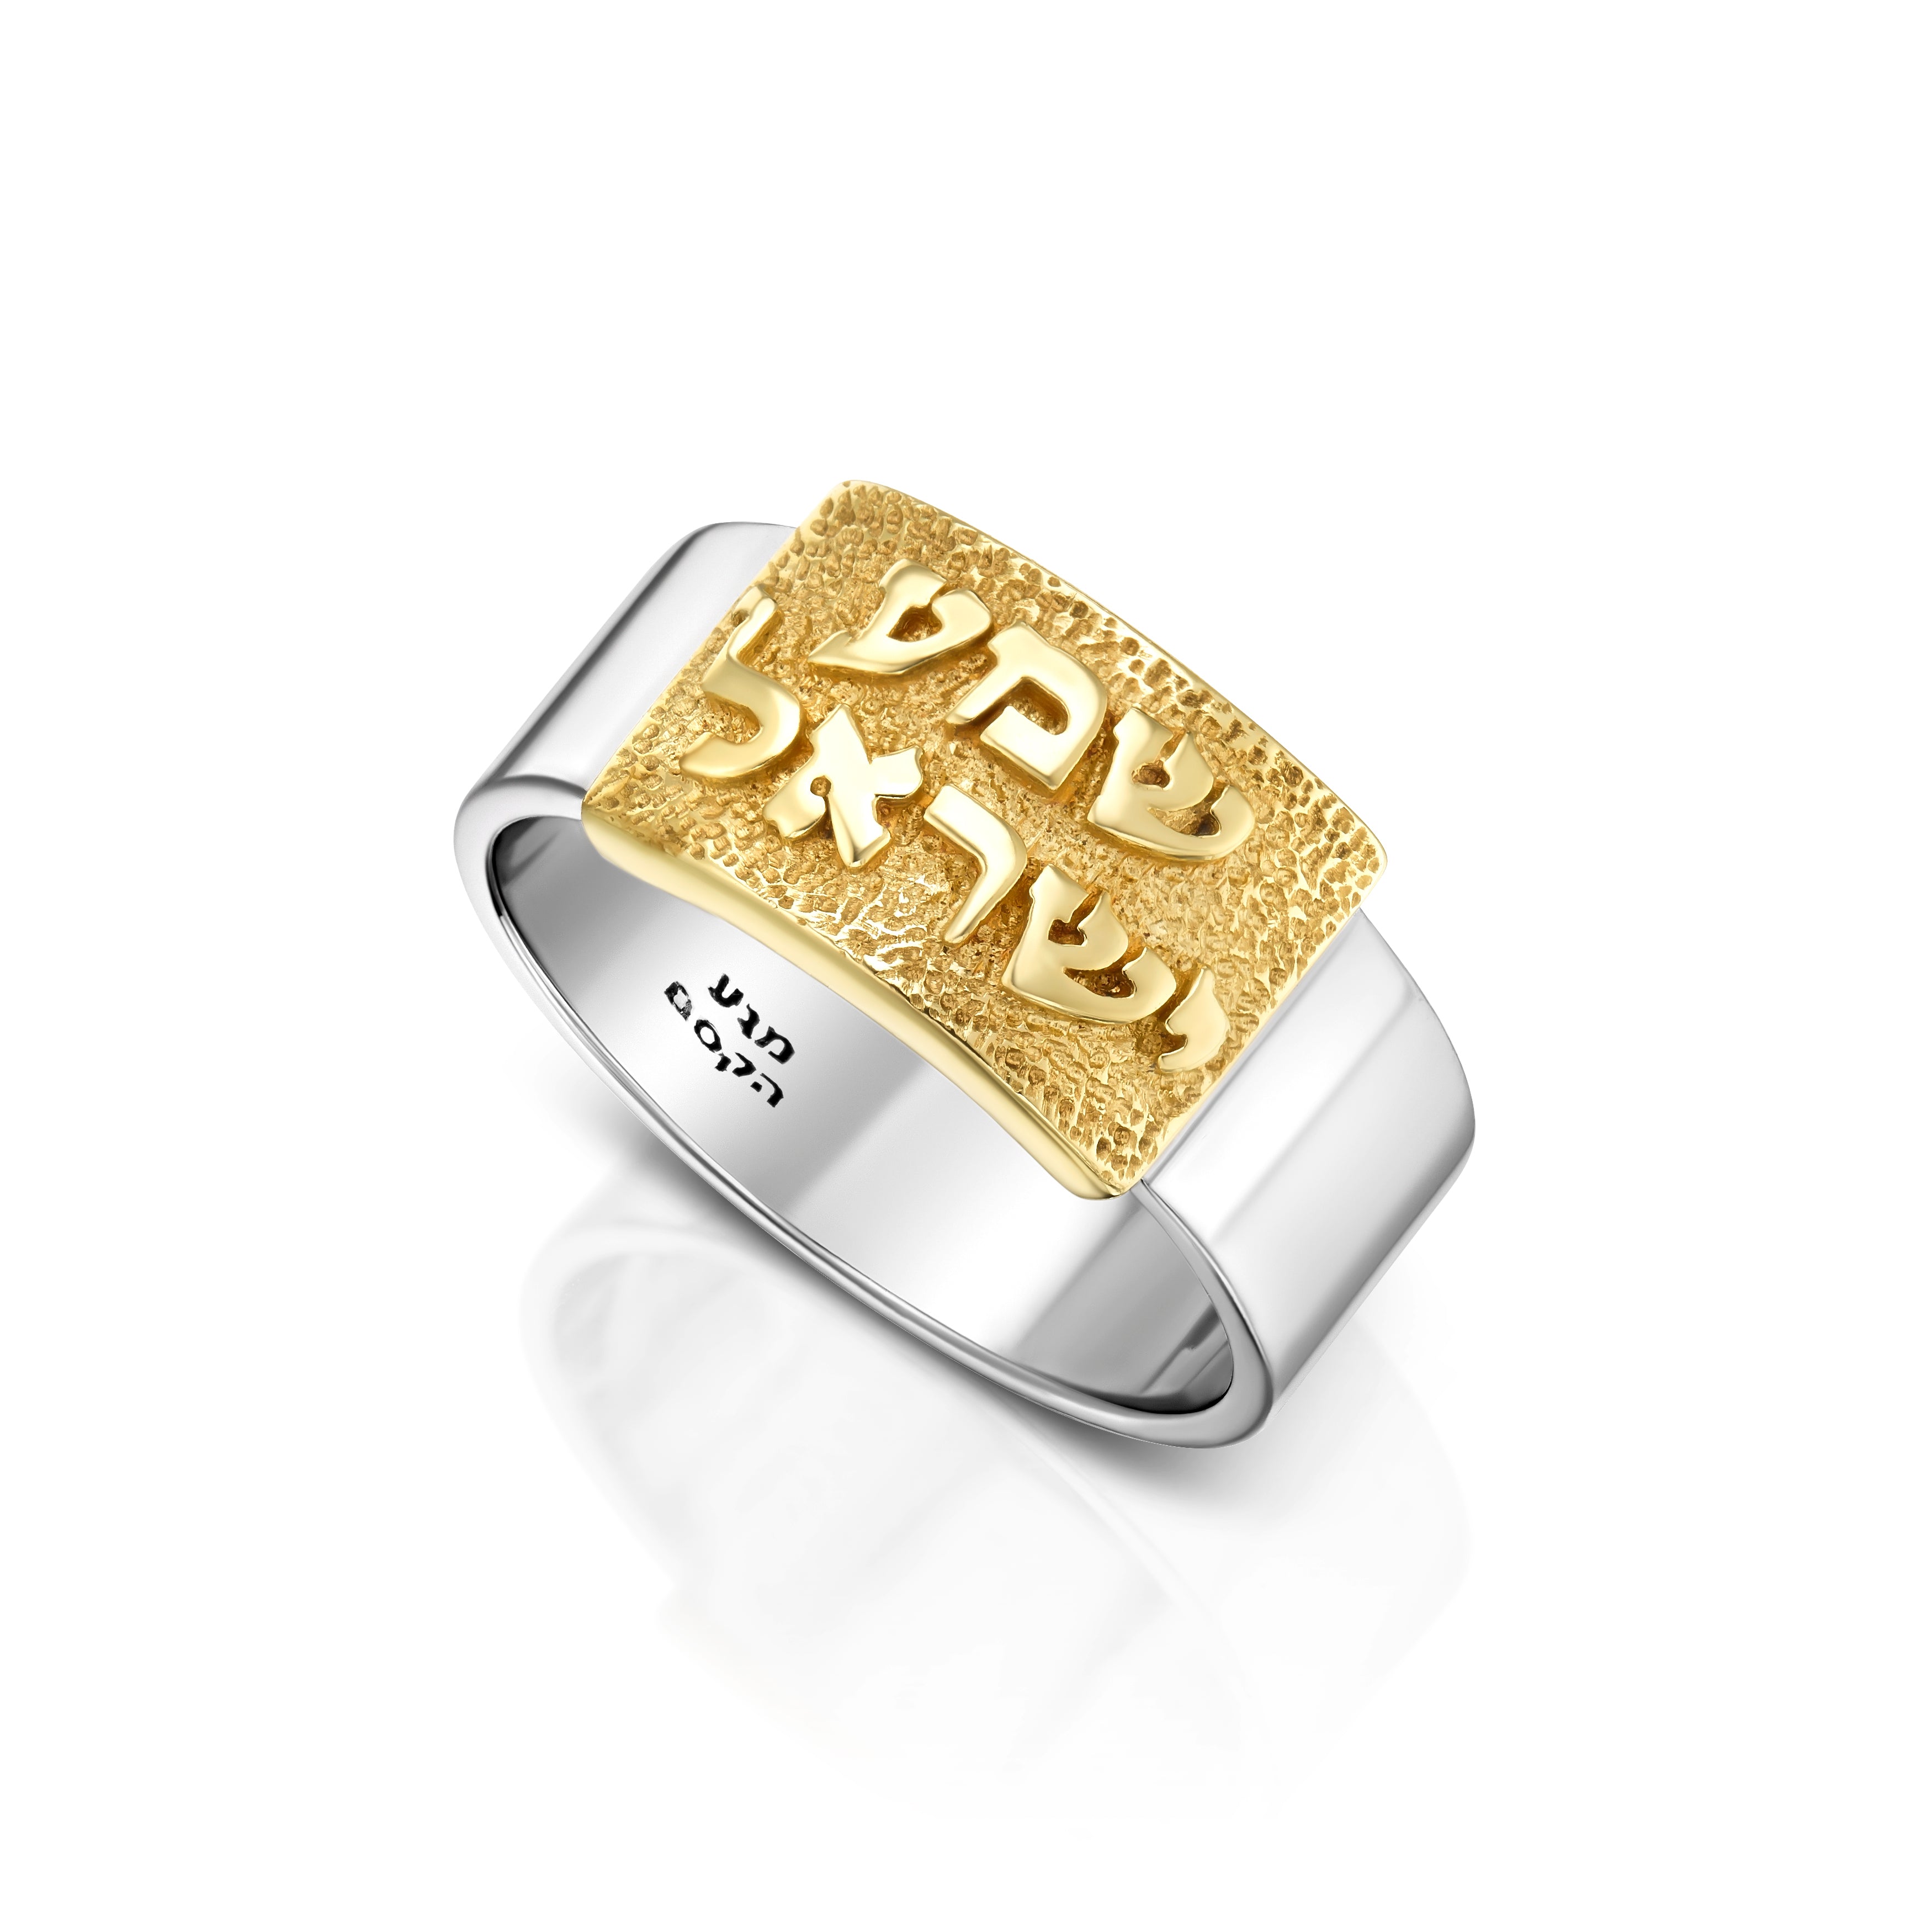 925 Sterling Silver Ring with 9K Gold "Shema Yisrael" Plate & Psalm 16 Inscription